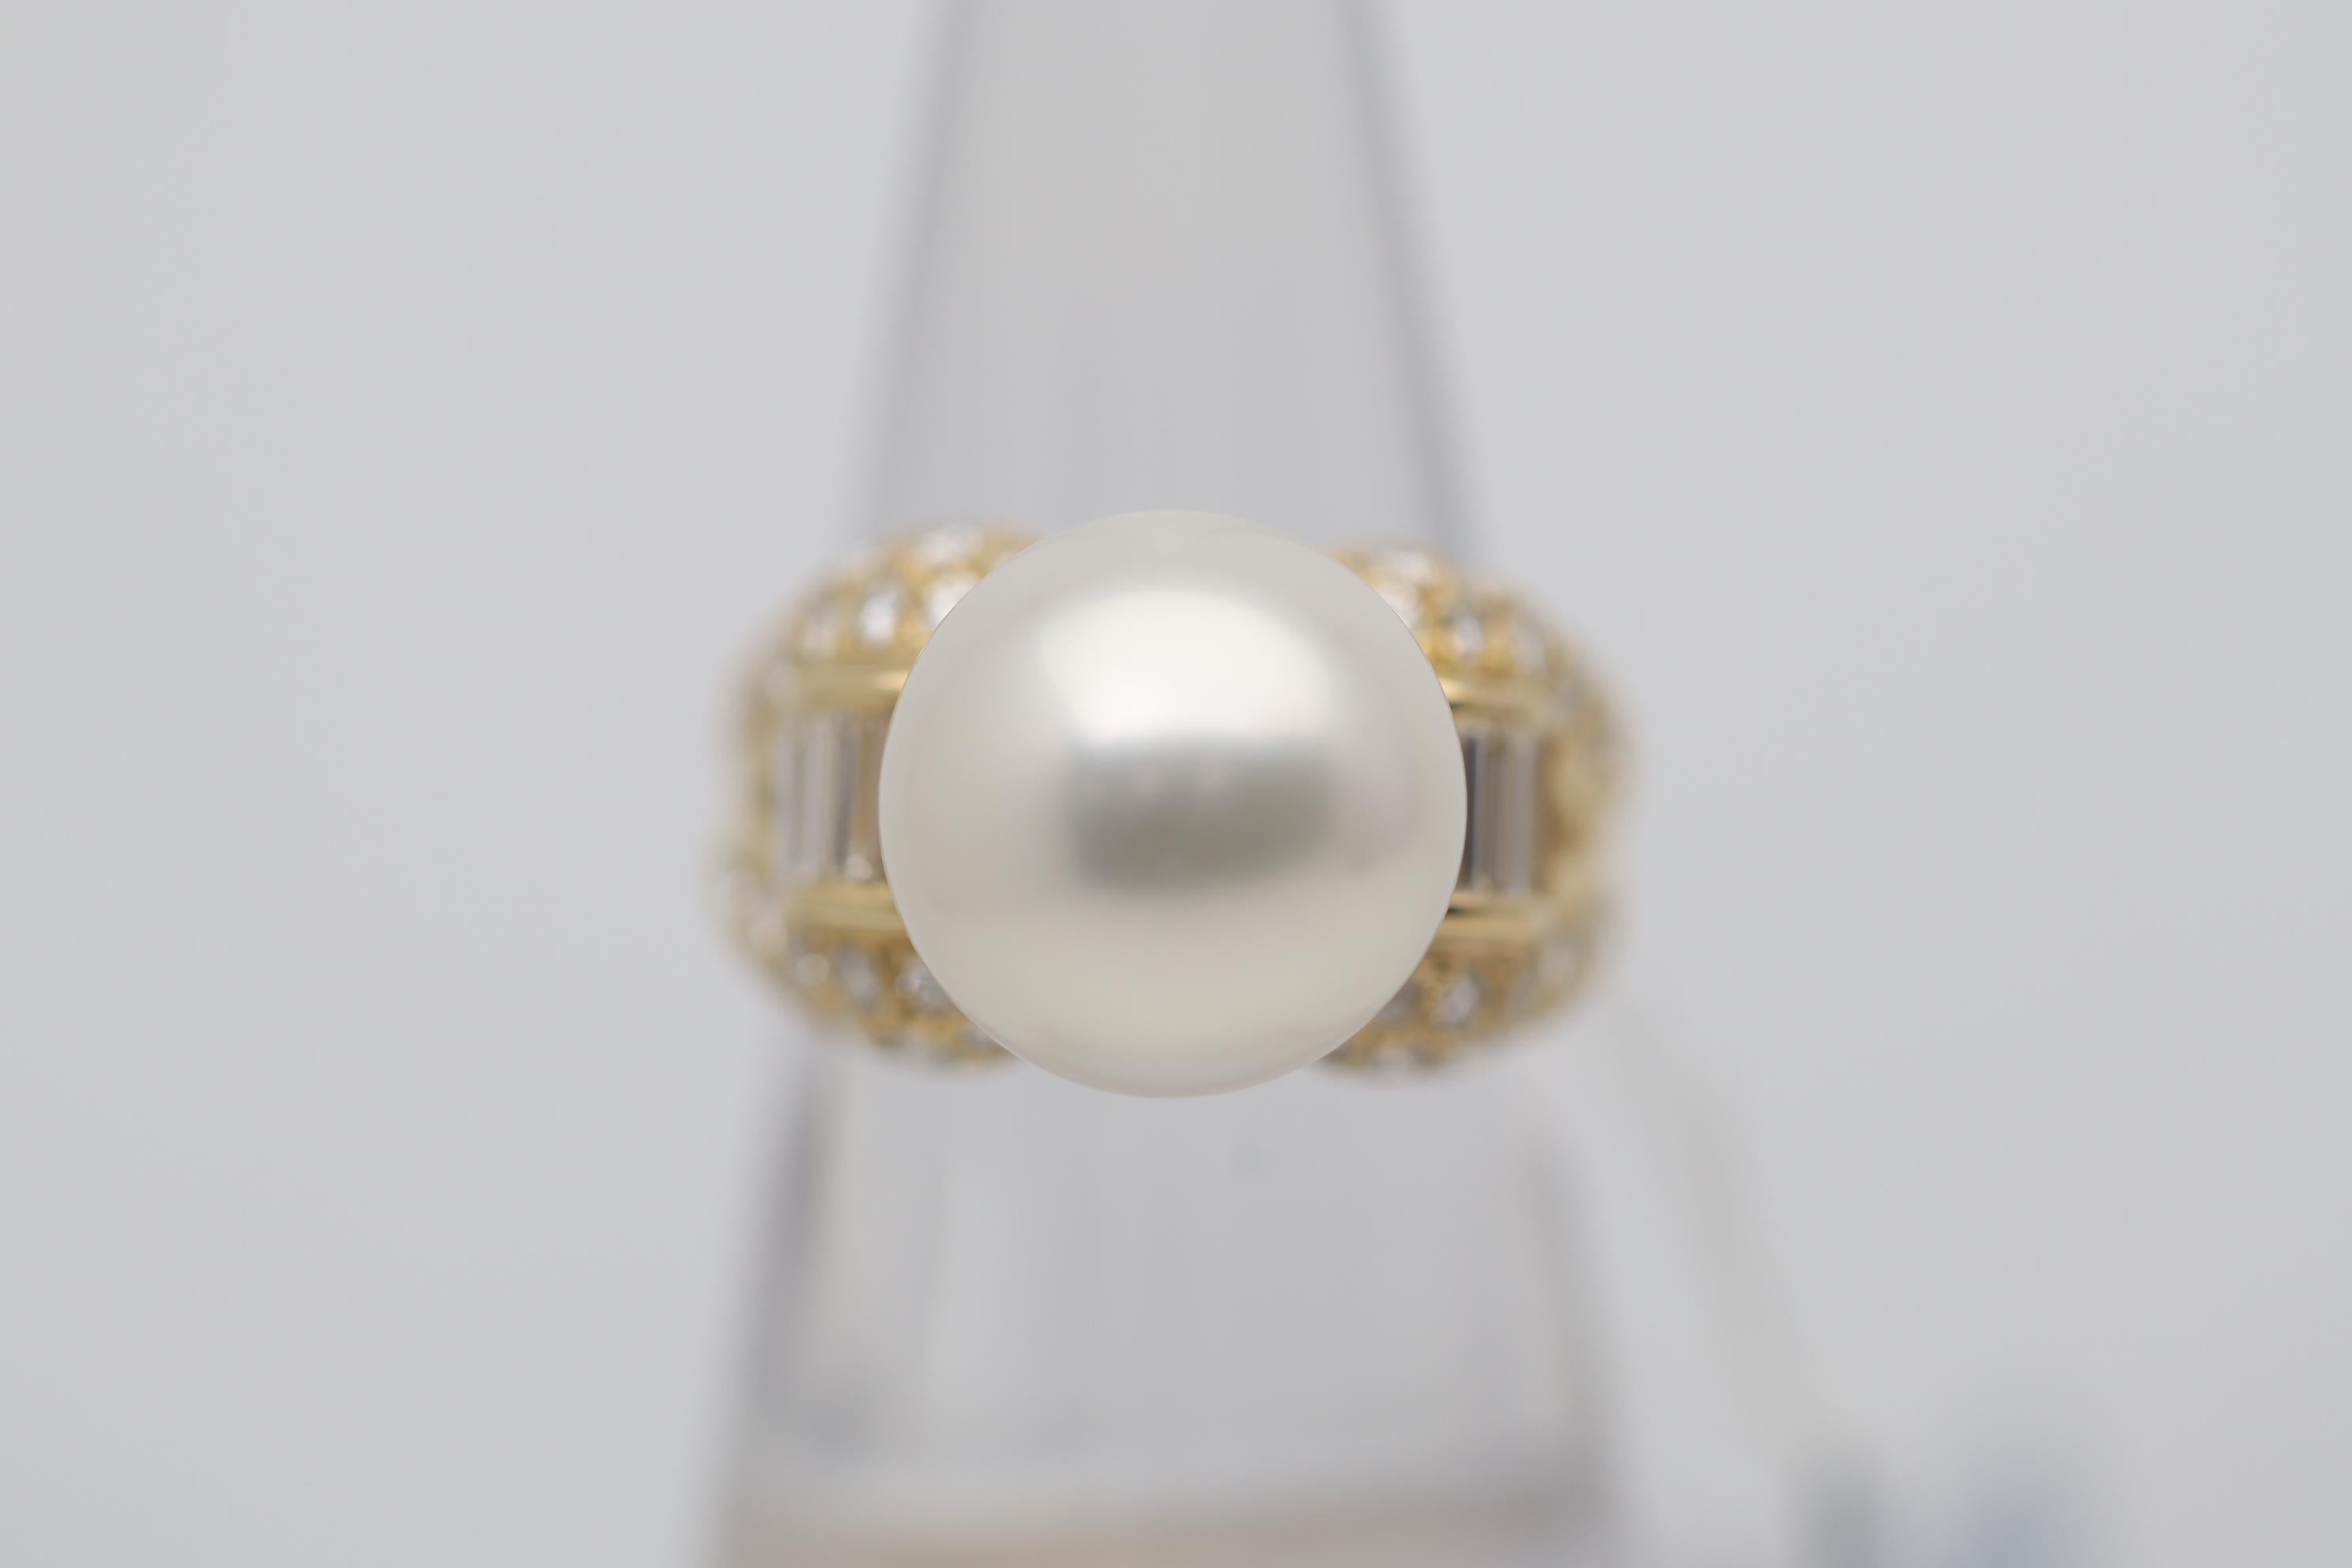 A lovely South Sea pearl takes center stage of the 18k yellow gold ring. It measures 13mm, is perfectly rounded, has excellent luster, and a soft pink overtone. It is complemented by 1.42 carats of baguette and round brilliant-cut diamonds set in a